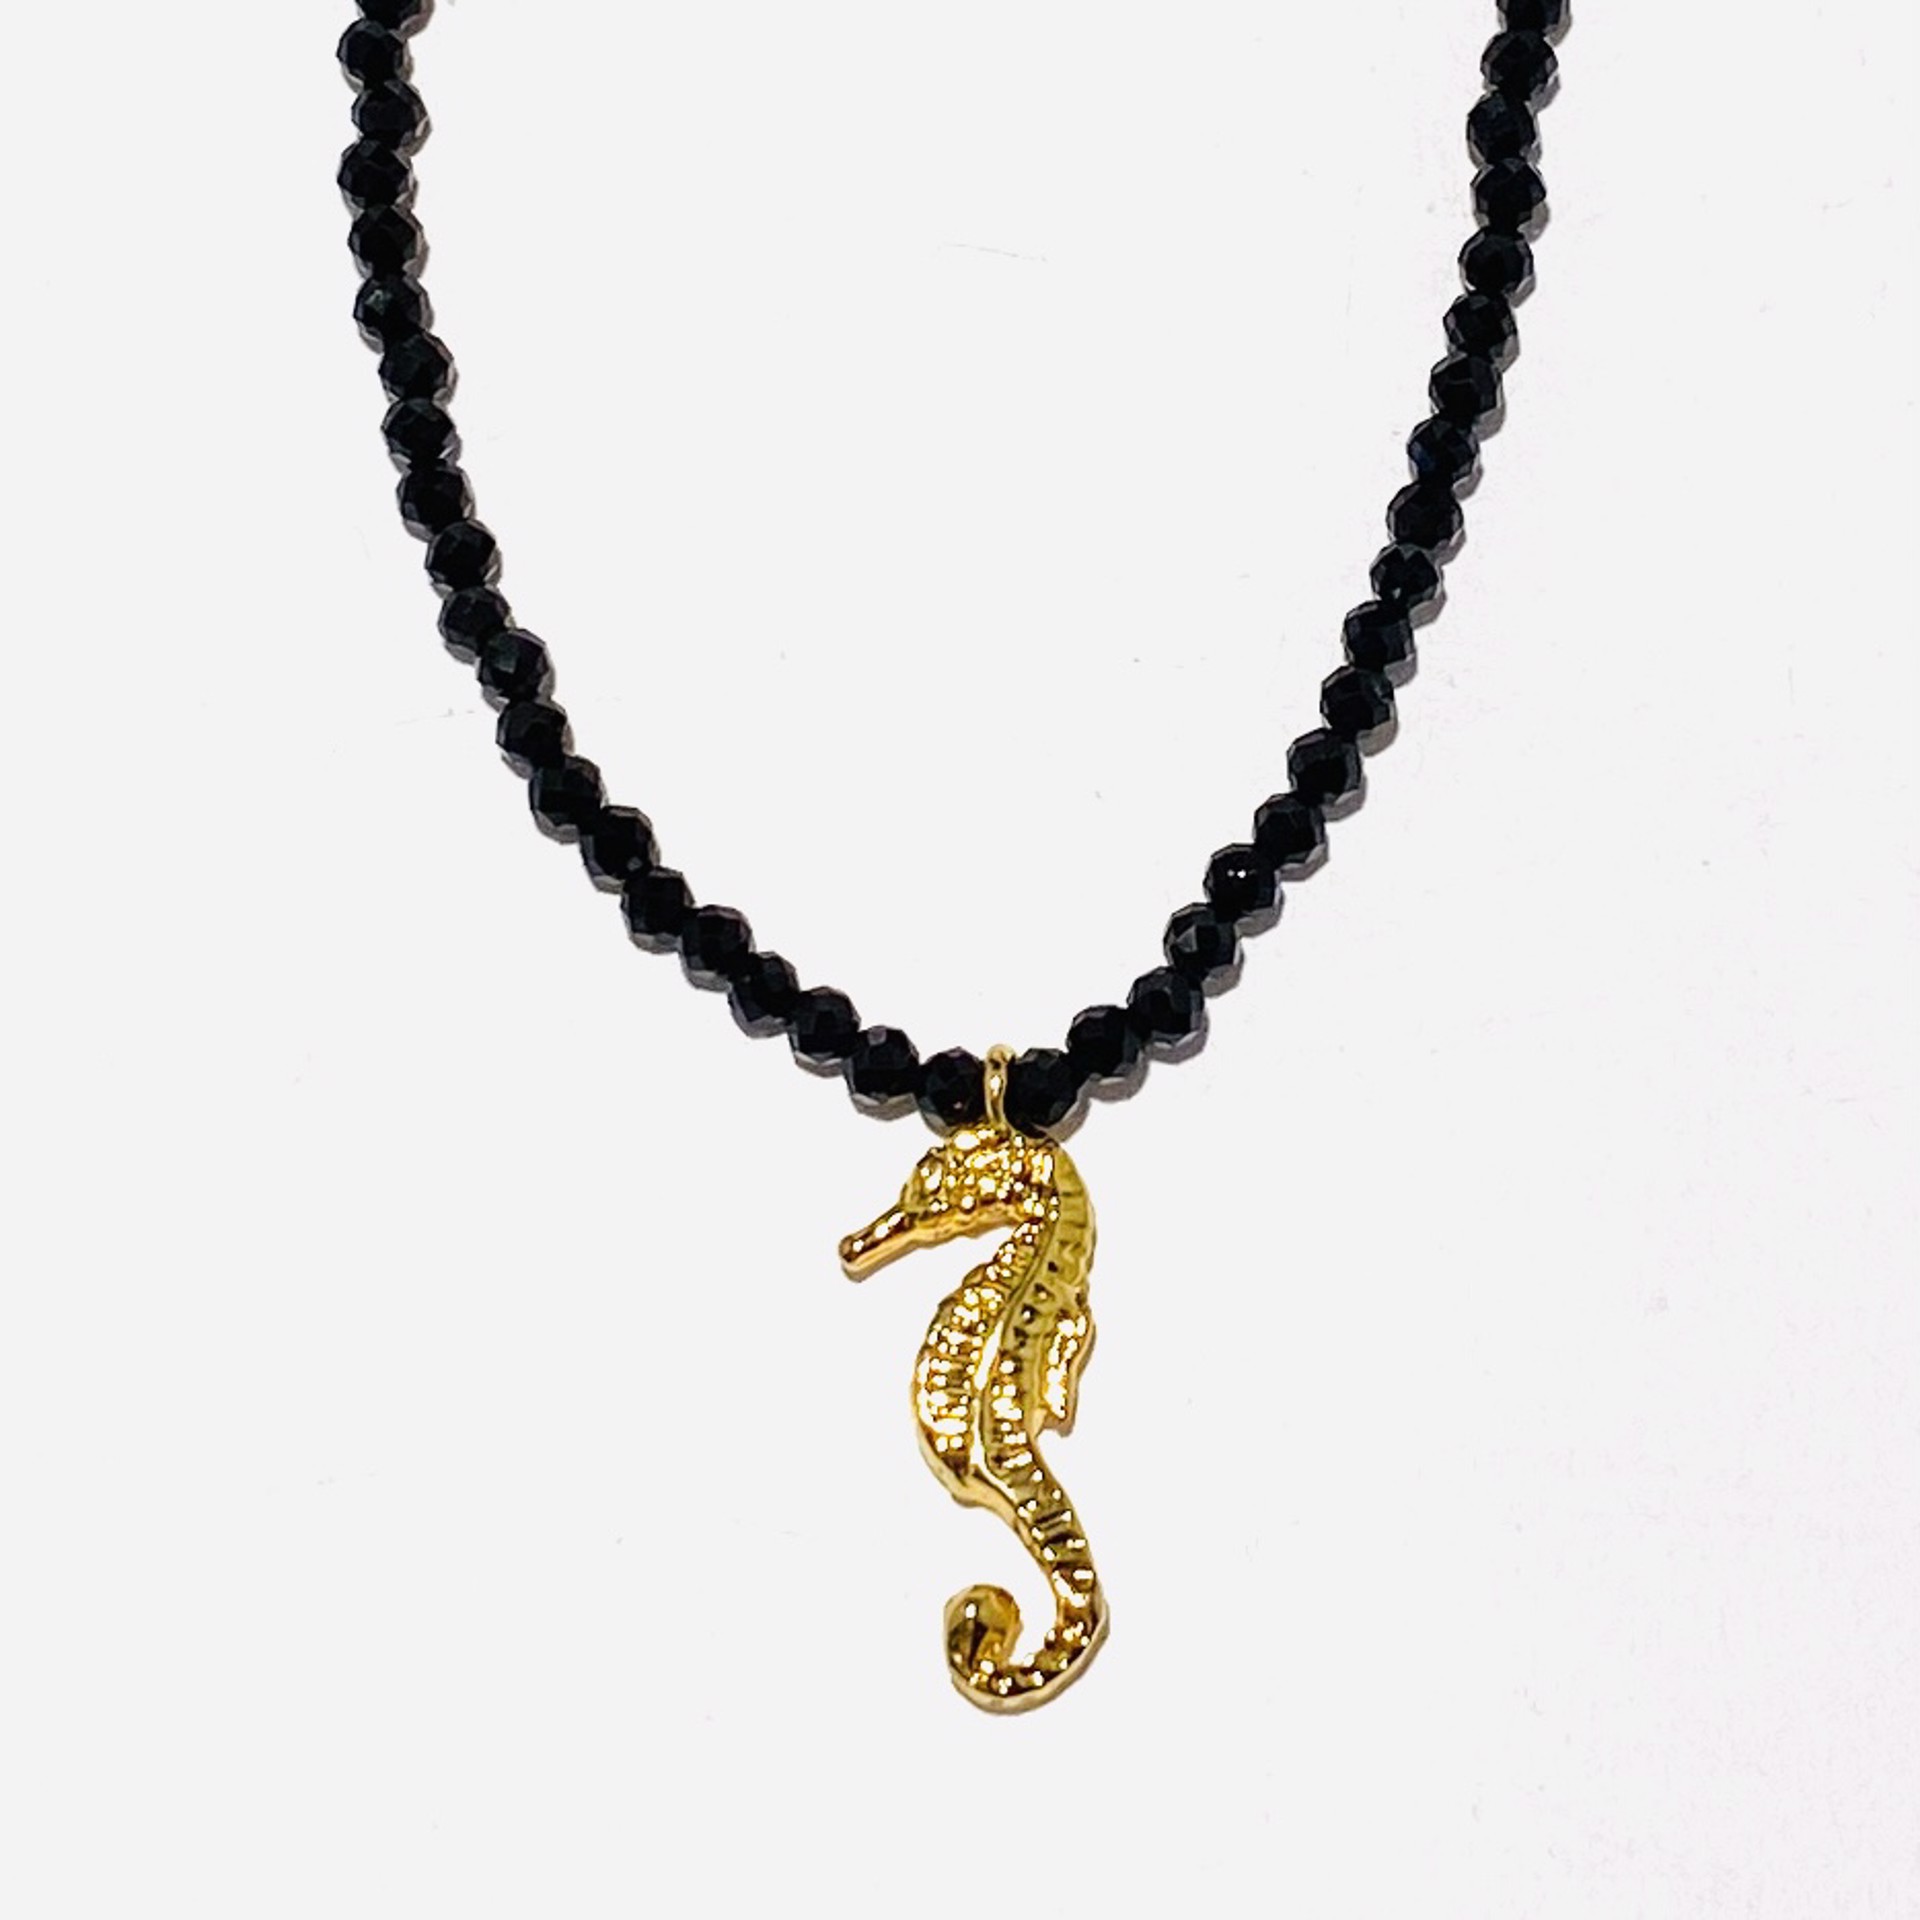 Black Faceted Spinel Tiny Vermeil Seahorse Pendant Necklace by Nance Trueworthy